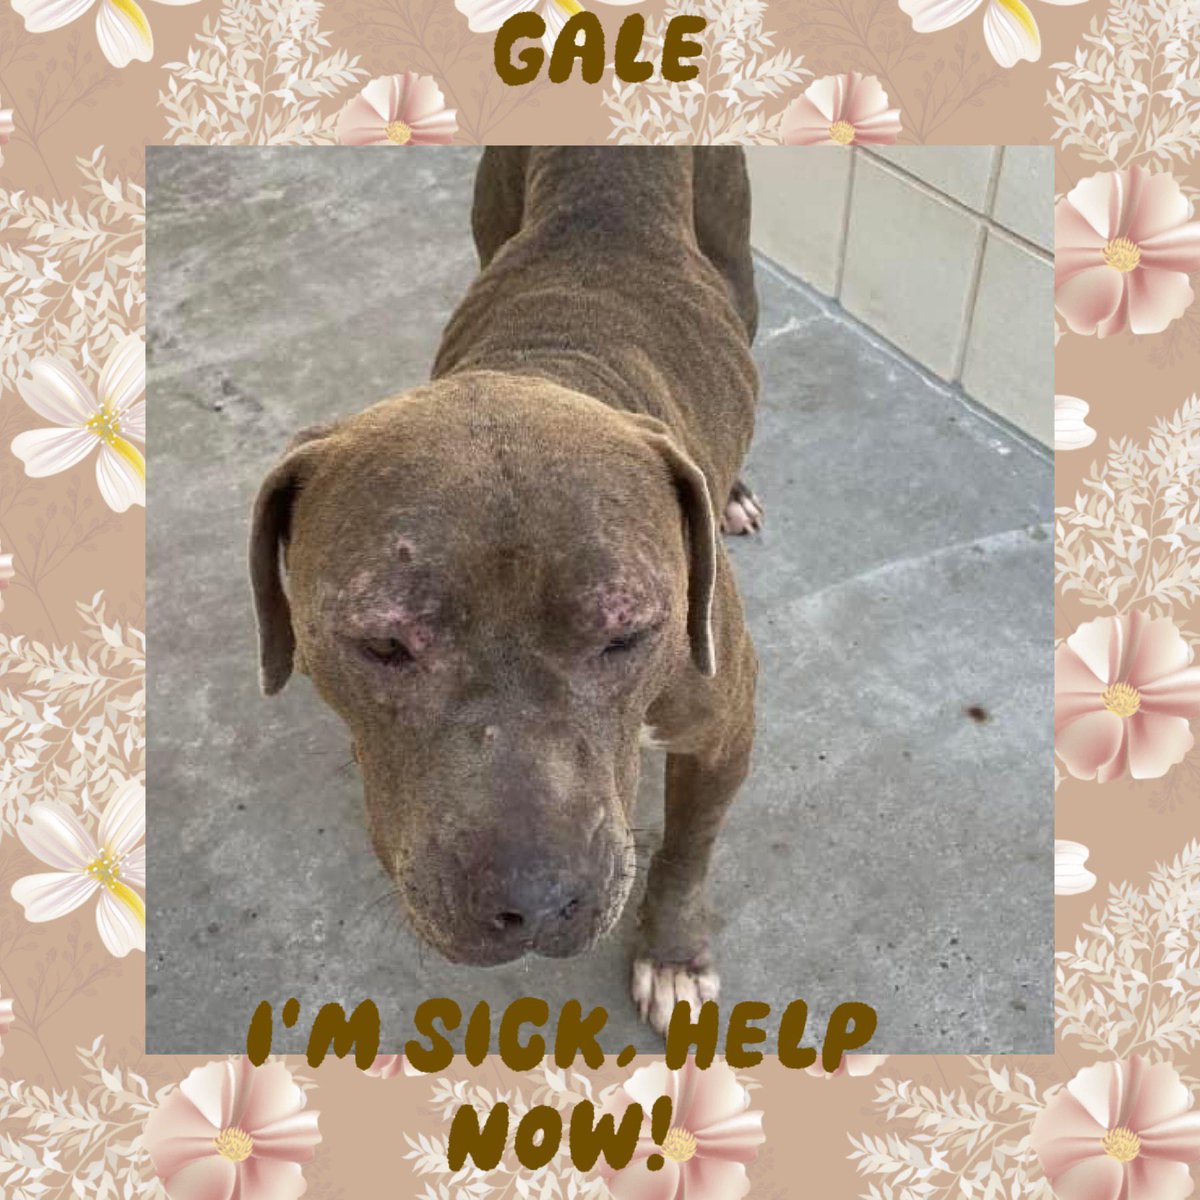 URGENT #MEDRESQ 🚨🔥needed for GALE #A367998 Sick girl 3 ys old, so NEGLECTED💔 ❌Alopecia ❌Open sores on face and legs ❌HW+ ❌Mange ❌Excoriations #Corpuschristi TX AC her fate is ☠️5/16😭 Pls #pledge for #MEDRESQ NOW. She needs you‼️